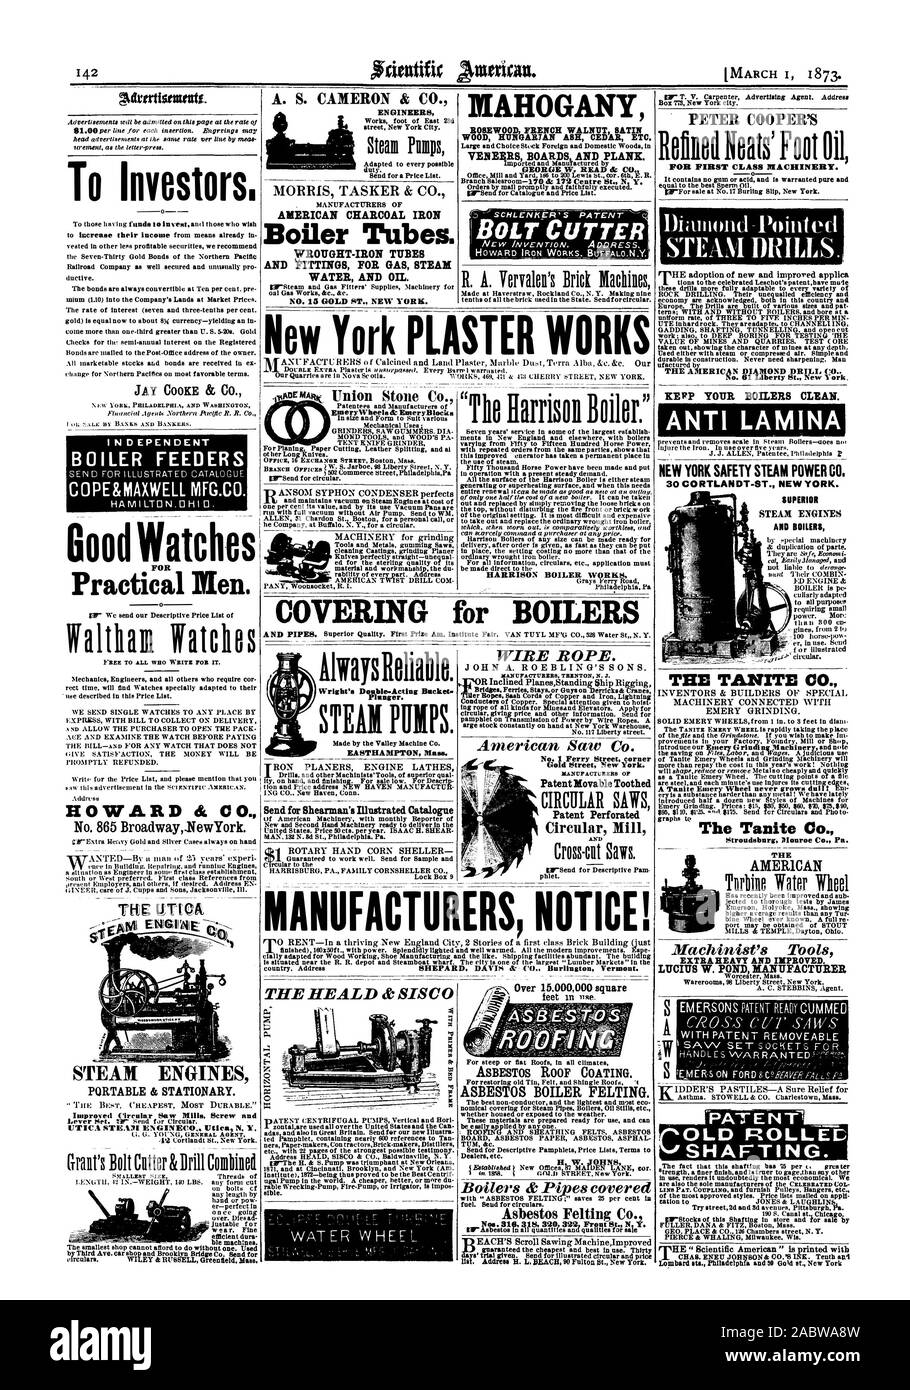 Adratistuutitt. To Investors. JAY COOKE & CO. BOILER FEEDERS COPE&MAXWELL MFG.CO. oDd Watches Practial Men. ME Urn e:01 STEAM ENGINES PORTABLE & STATIONARY. Improved Circular Saw Millis Screw and UTICA STEAM EN GINEc0 Utica N. Y. A. S. CAMERON & CO. ENGINEERS MORRIS TASKER & CO. Boiler Tubes. WROUGHT-IRON TUBES AND FITTINGS FOR GAS STEAM WATER AND OIL. NO. 15 GOLD ST NEW YORK. ow York PLASTER WOR MAHOGANY ROSEWOOD FRENCH WALNUT SATIN WOOD HUNGARIAN ASH CEDAR ETC. SCHLENKER' S PATENT BOLT CUTTER PETER COOPER'S RolluedNeats'Foot Oil FOR FIRST CLASS MACHINERY. 0 Diamond Pointed STEANI BRILLS. THE Stock Photo